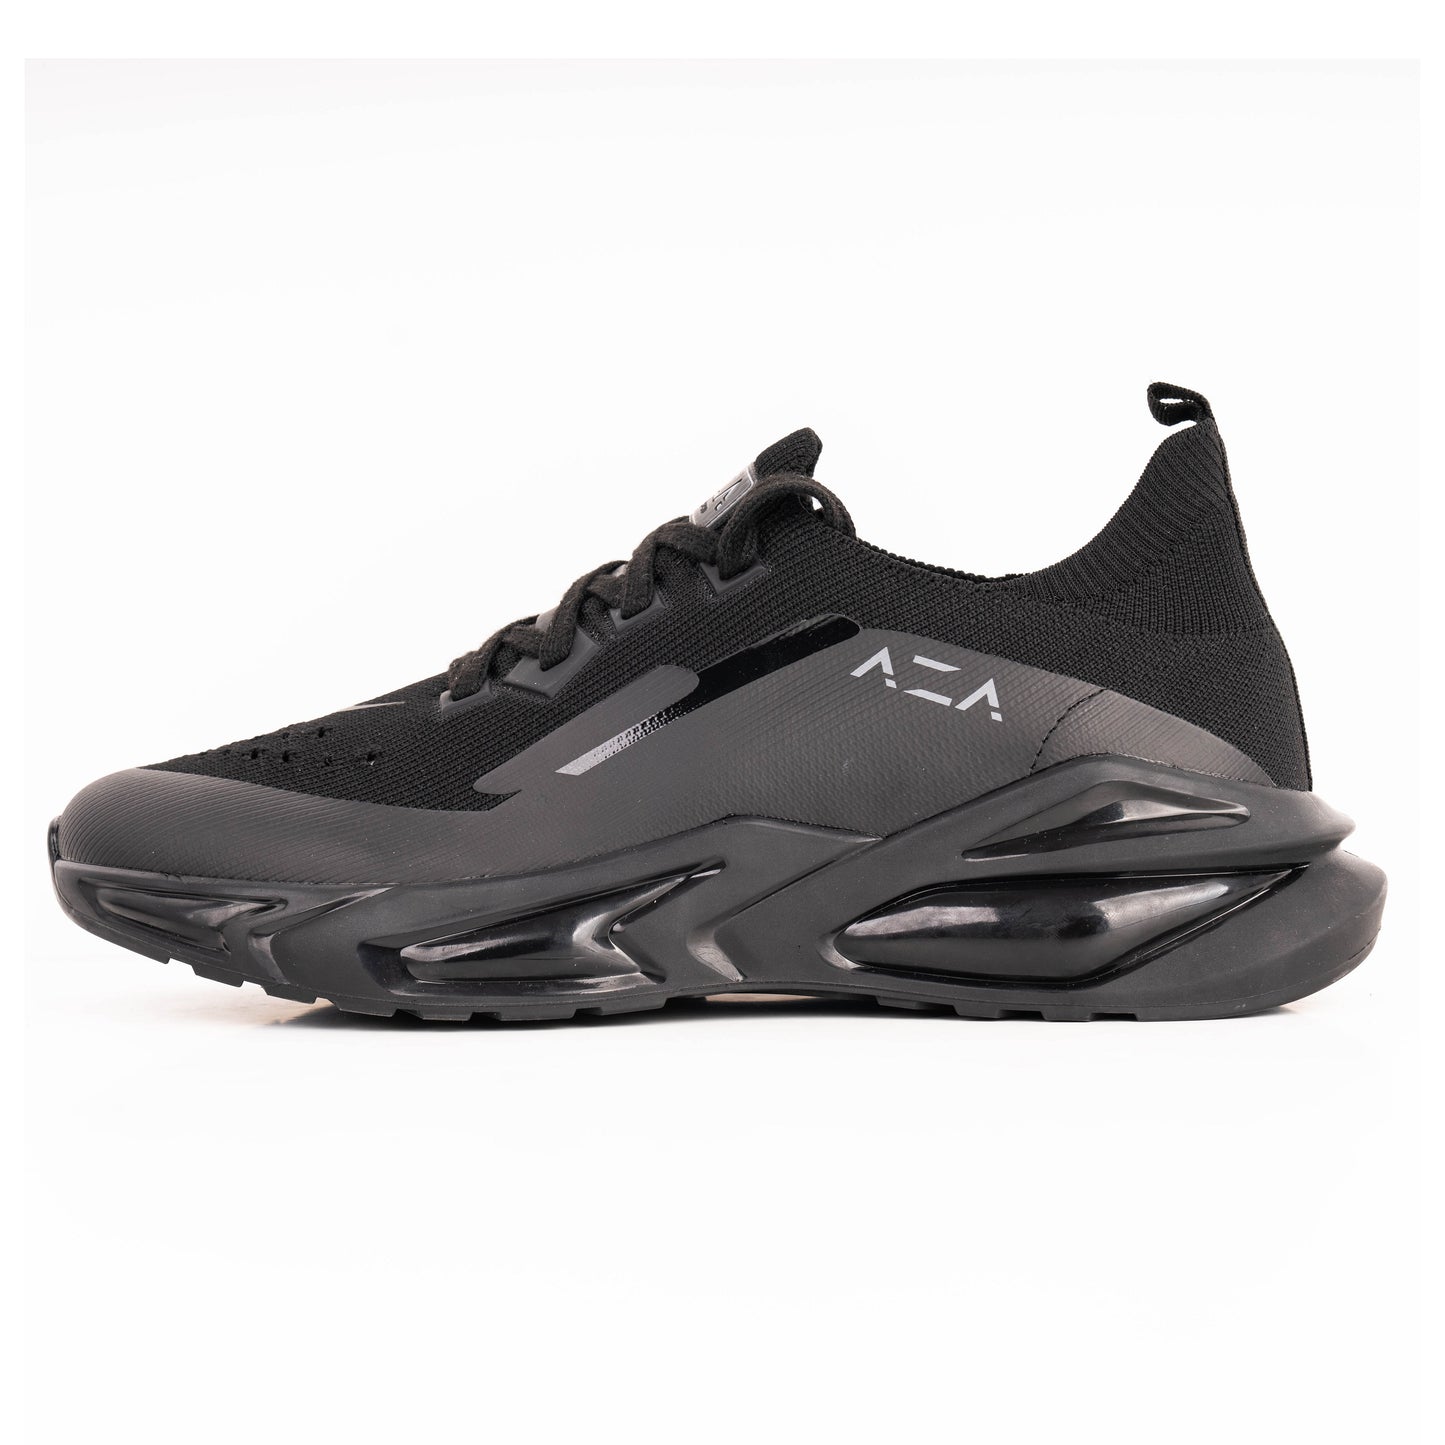 AZA by JACKSON Shoes Black Series - Scrappy Player Edition